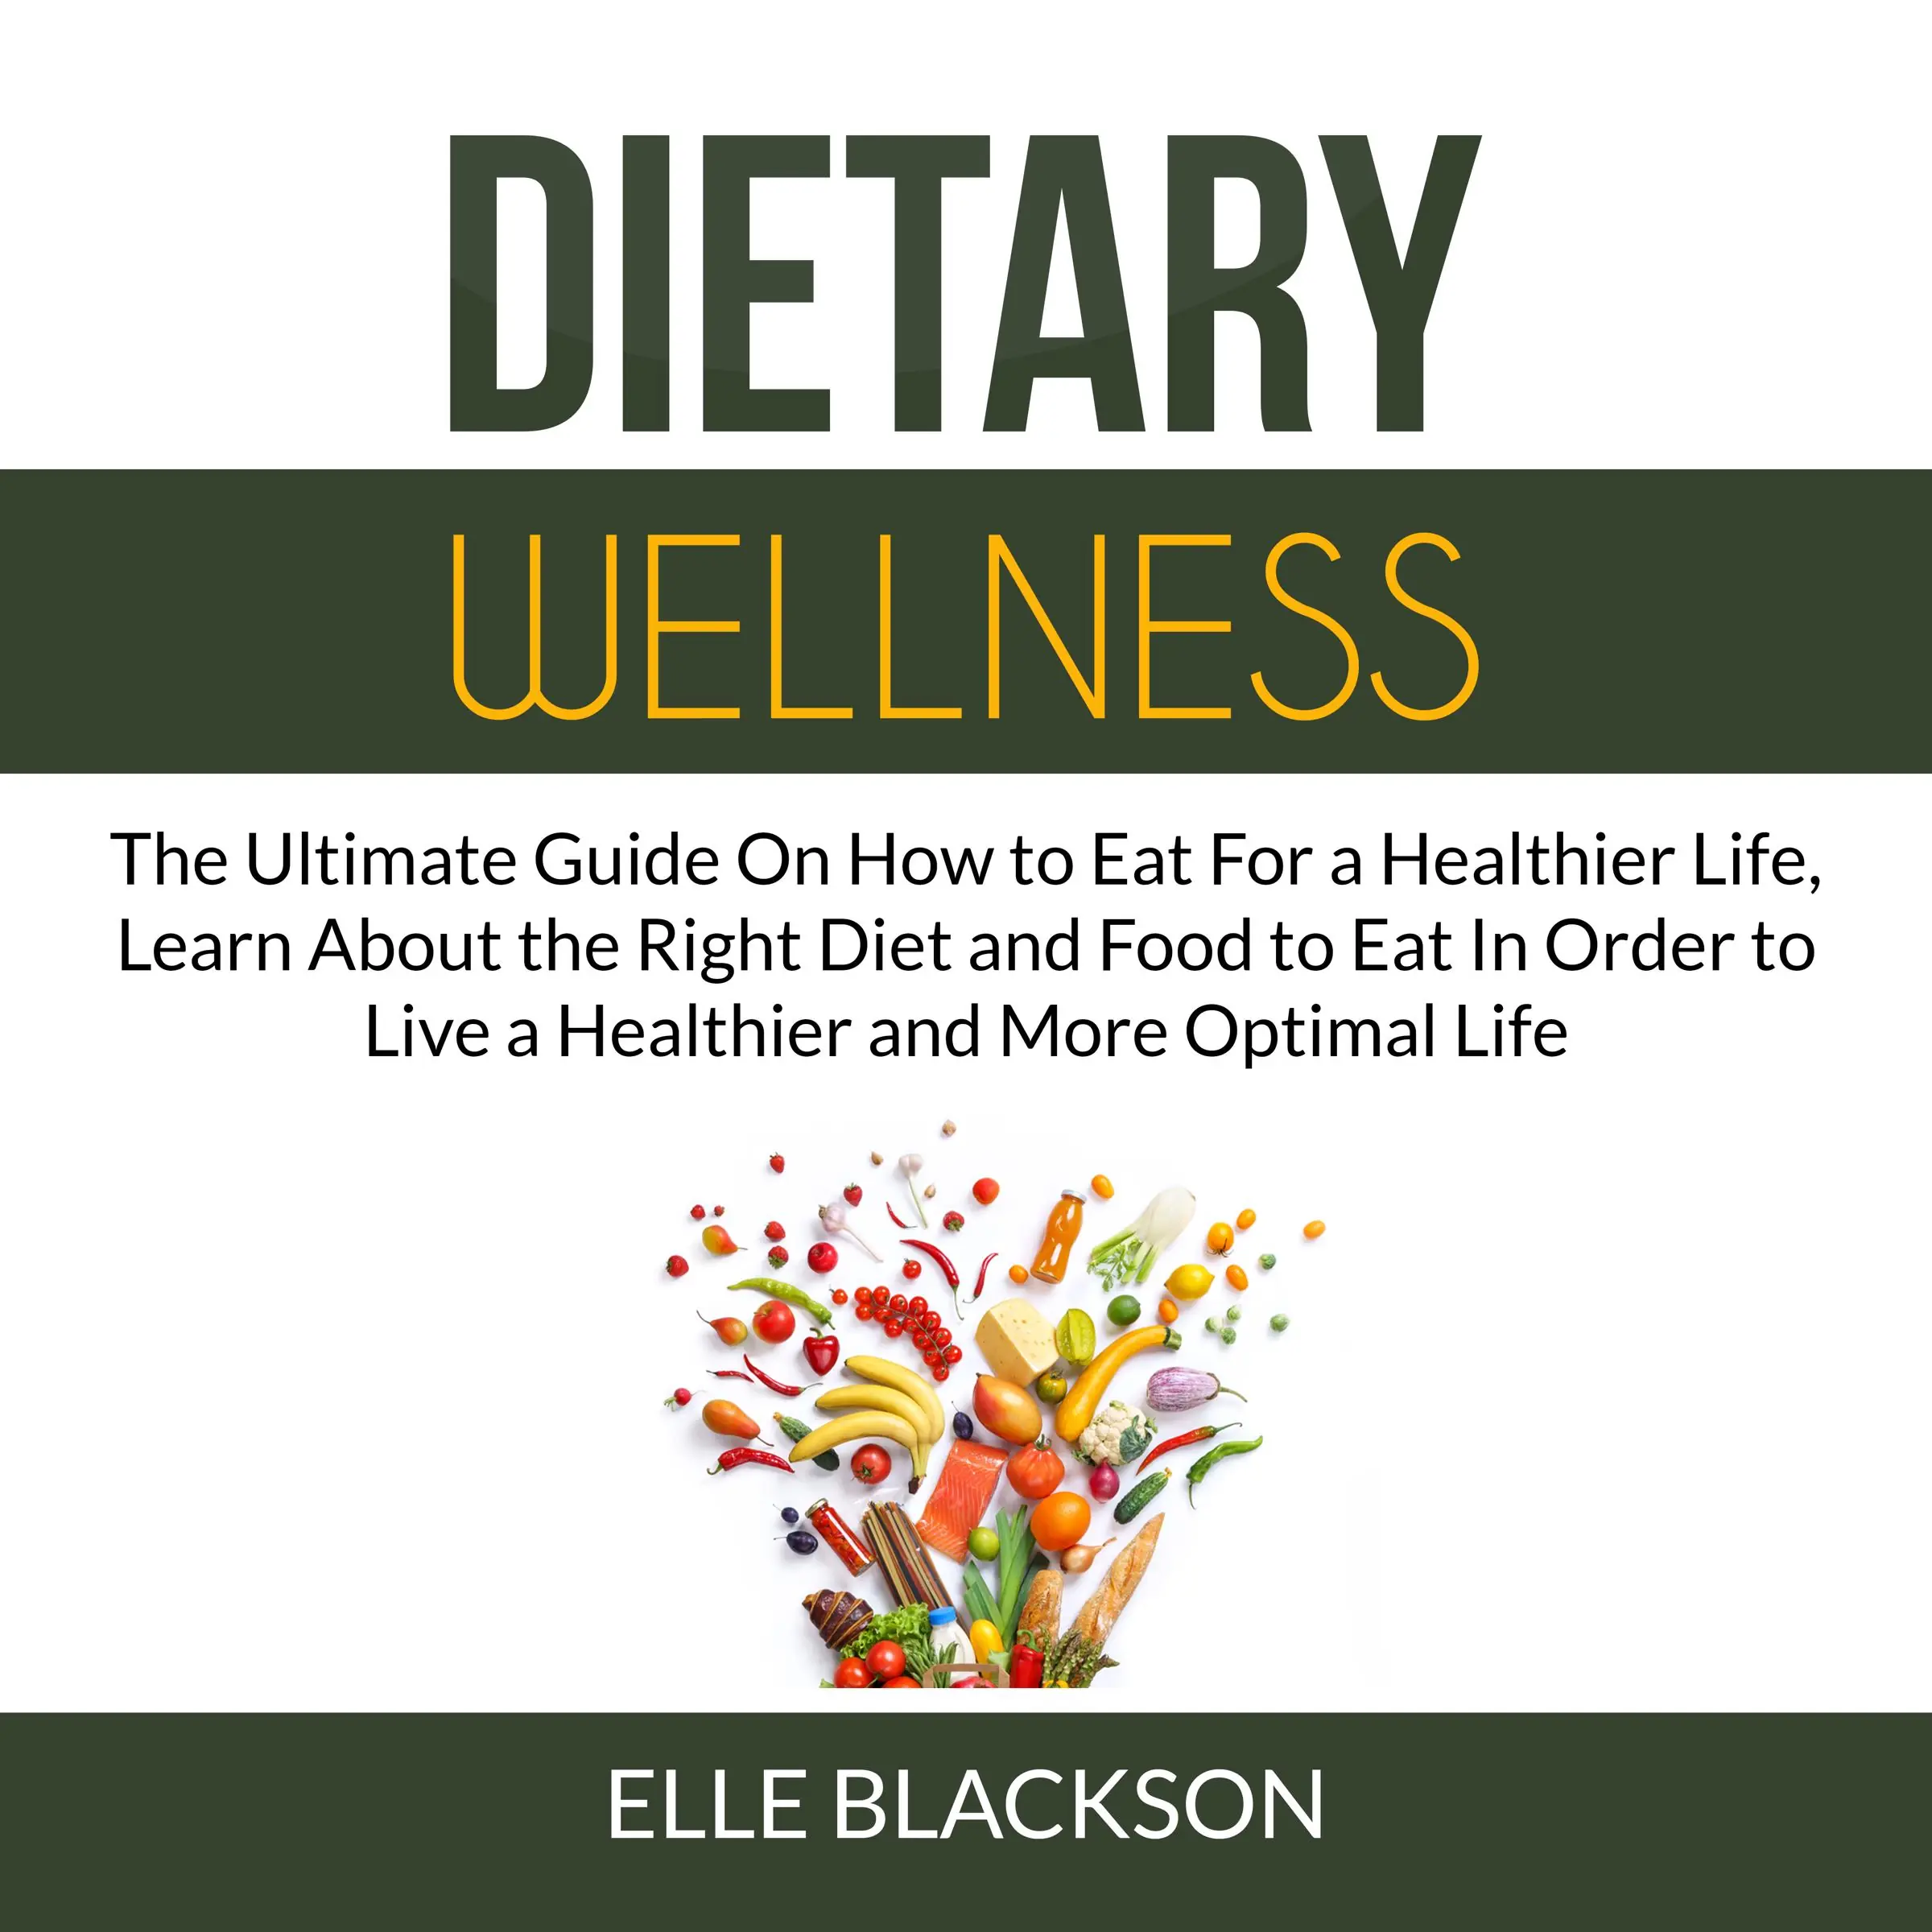 Dietary Wellness: The Ultimate Guide On How to Eat For a Healthier Life, Learn About the Right Diet and Food to Eat In Order to Live a Healthier and More Optimal Life Audiobook by Elle Blackson